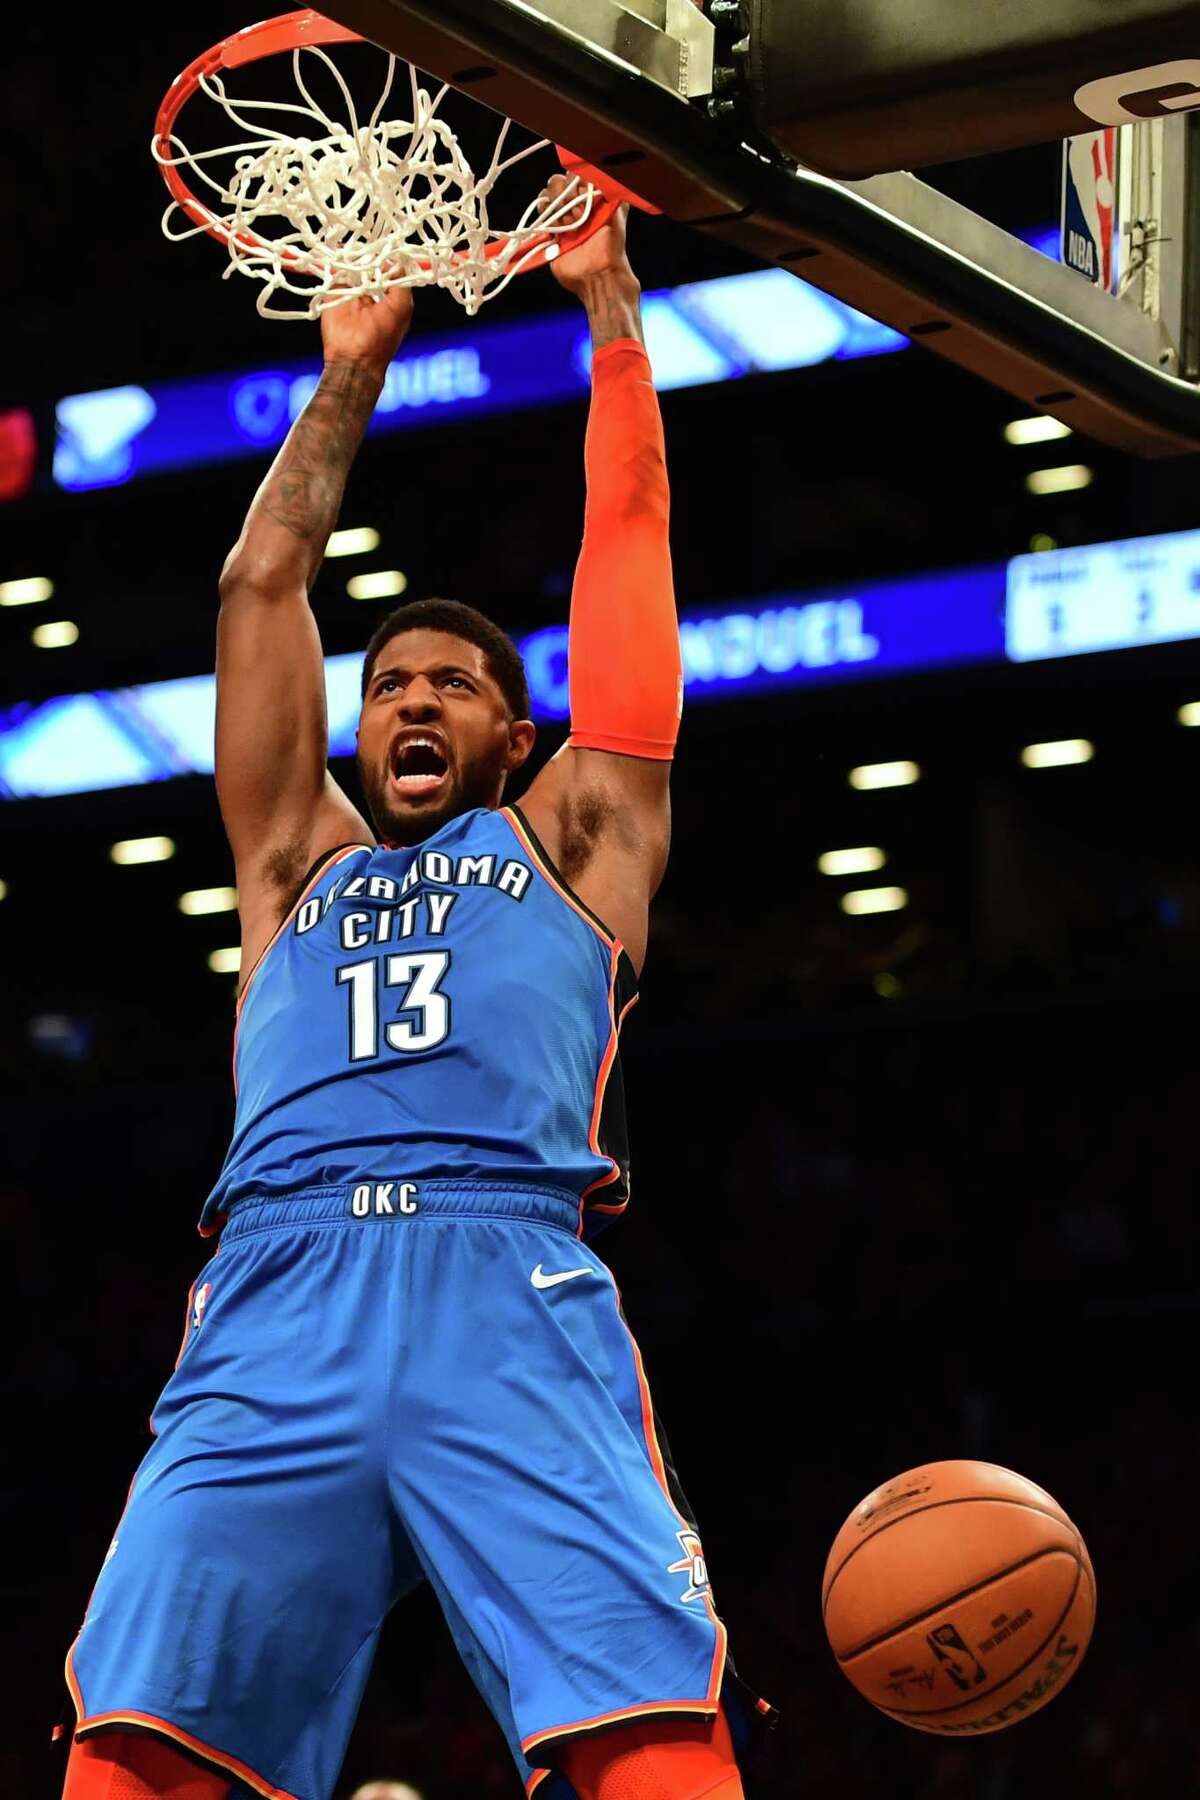 NEW YORK, NEW YORK - DECEMBER 05: Paul George #13 of the Oklahoma City Thunder reacts after making a slam dunk during the fourth quarter of the game against Brooklyn Nets at Barclays Center on December 05, 2018 in New York City. NOTE TO USER: User expressly acknowledges and agrees that, by downloading and or using this photograph, User is consenting to the terms and conditions of the Getty Images License Agreement. (Photo by Sarah Stier/Getty Images)